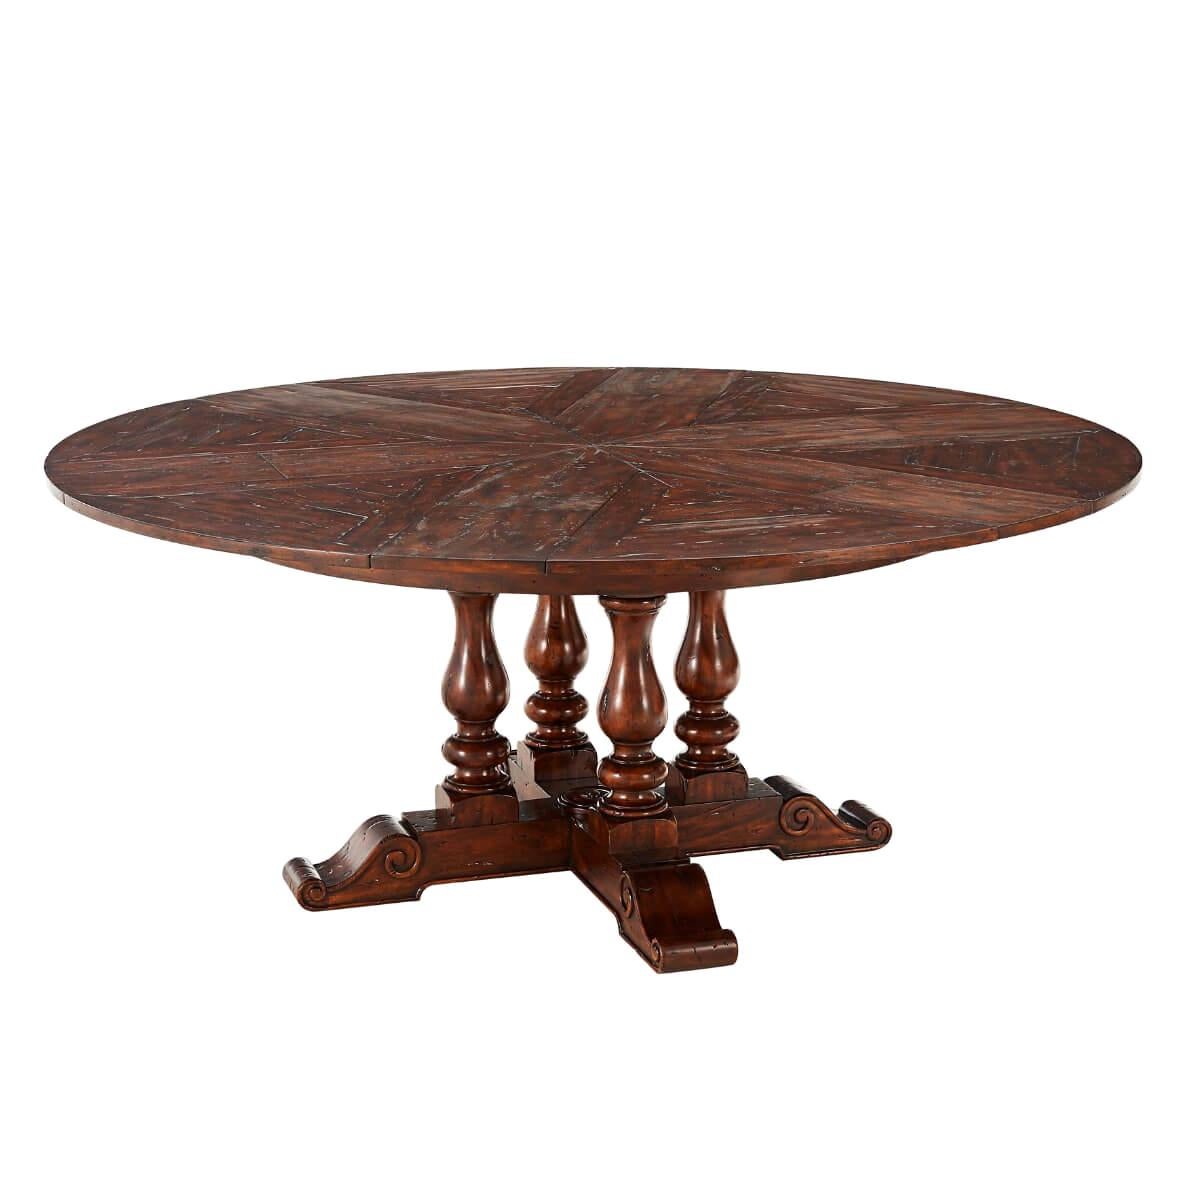 Early English Round Extension Dining Table 72 For Sale